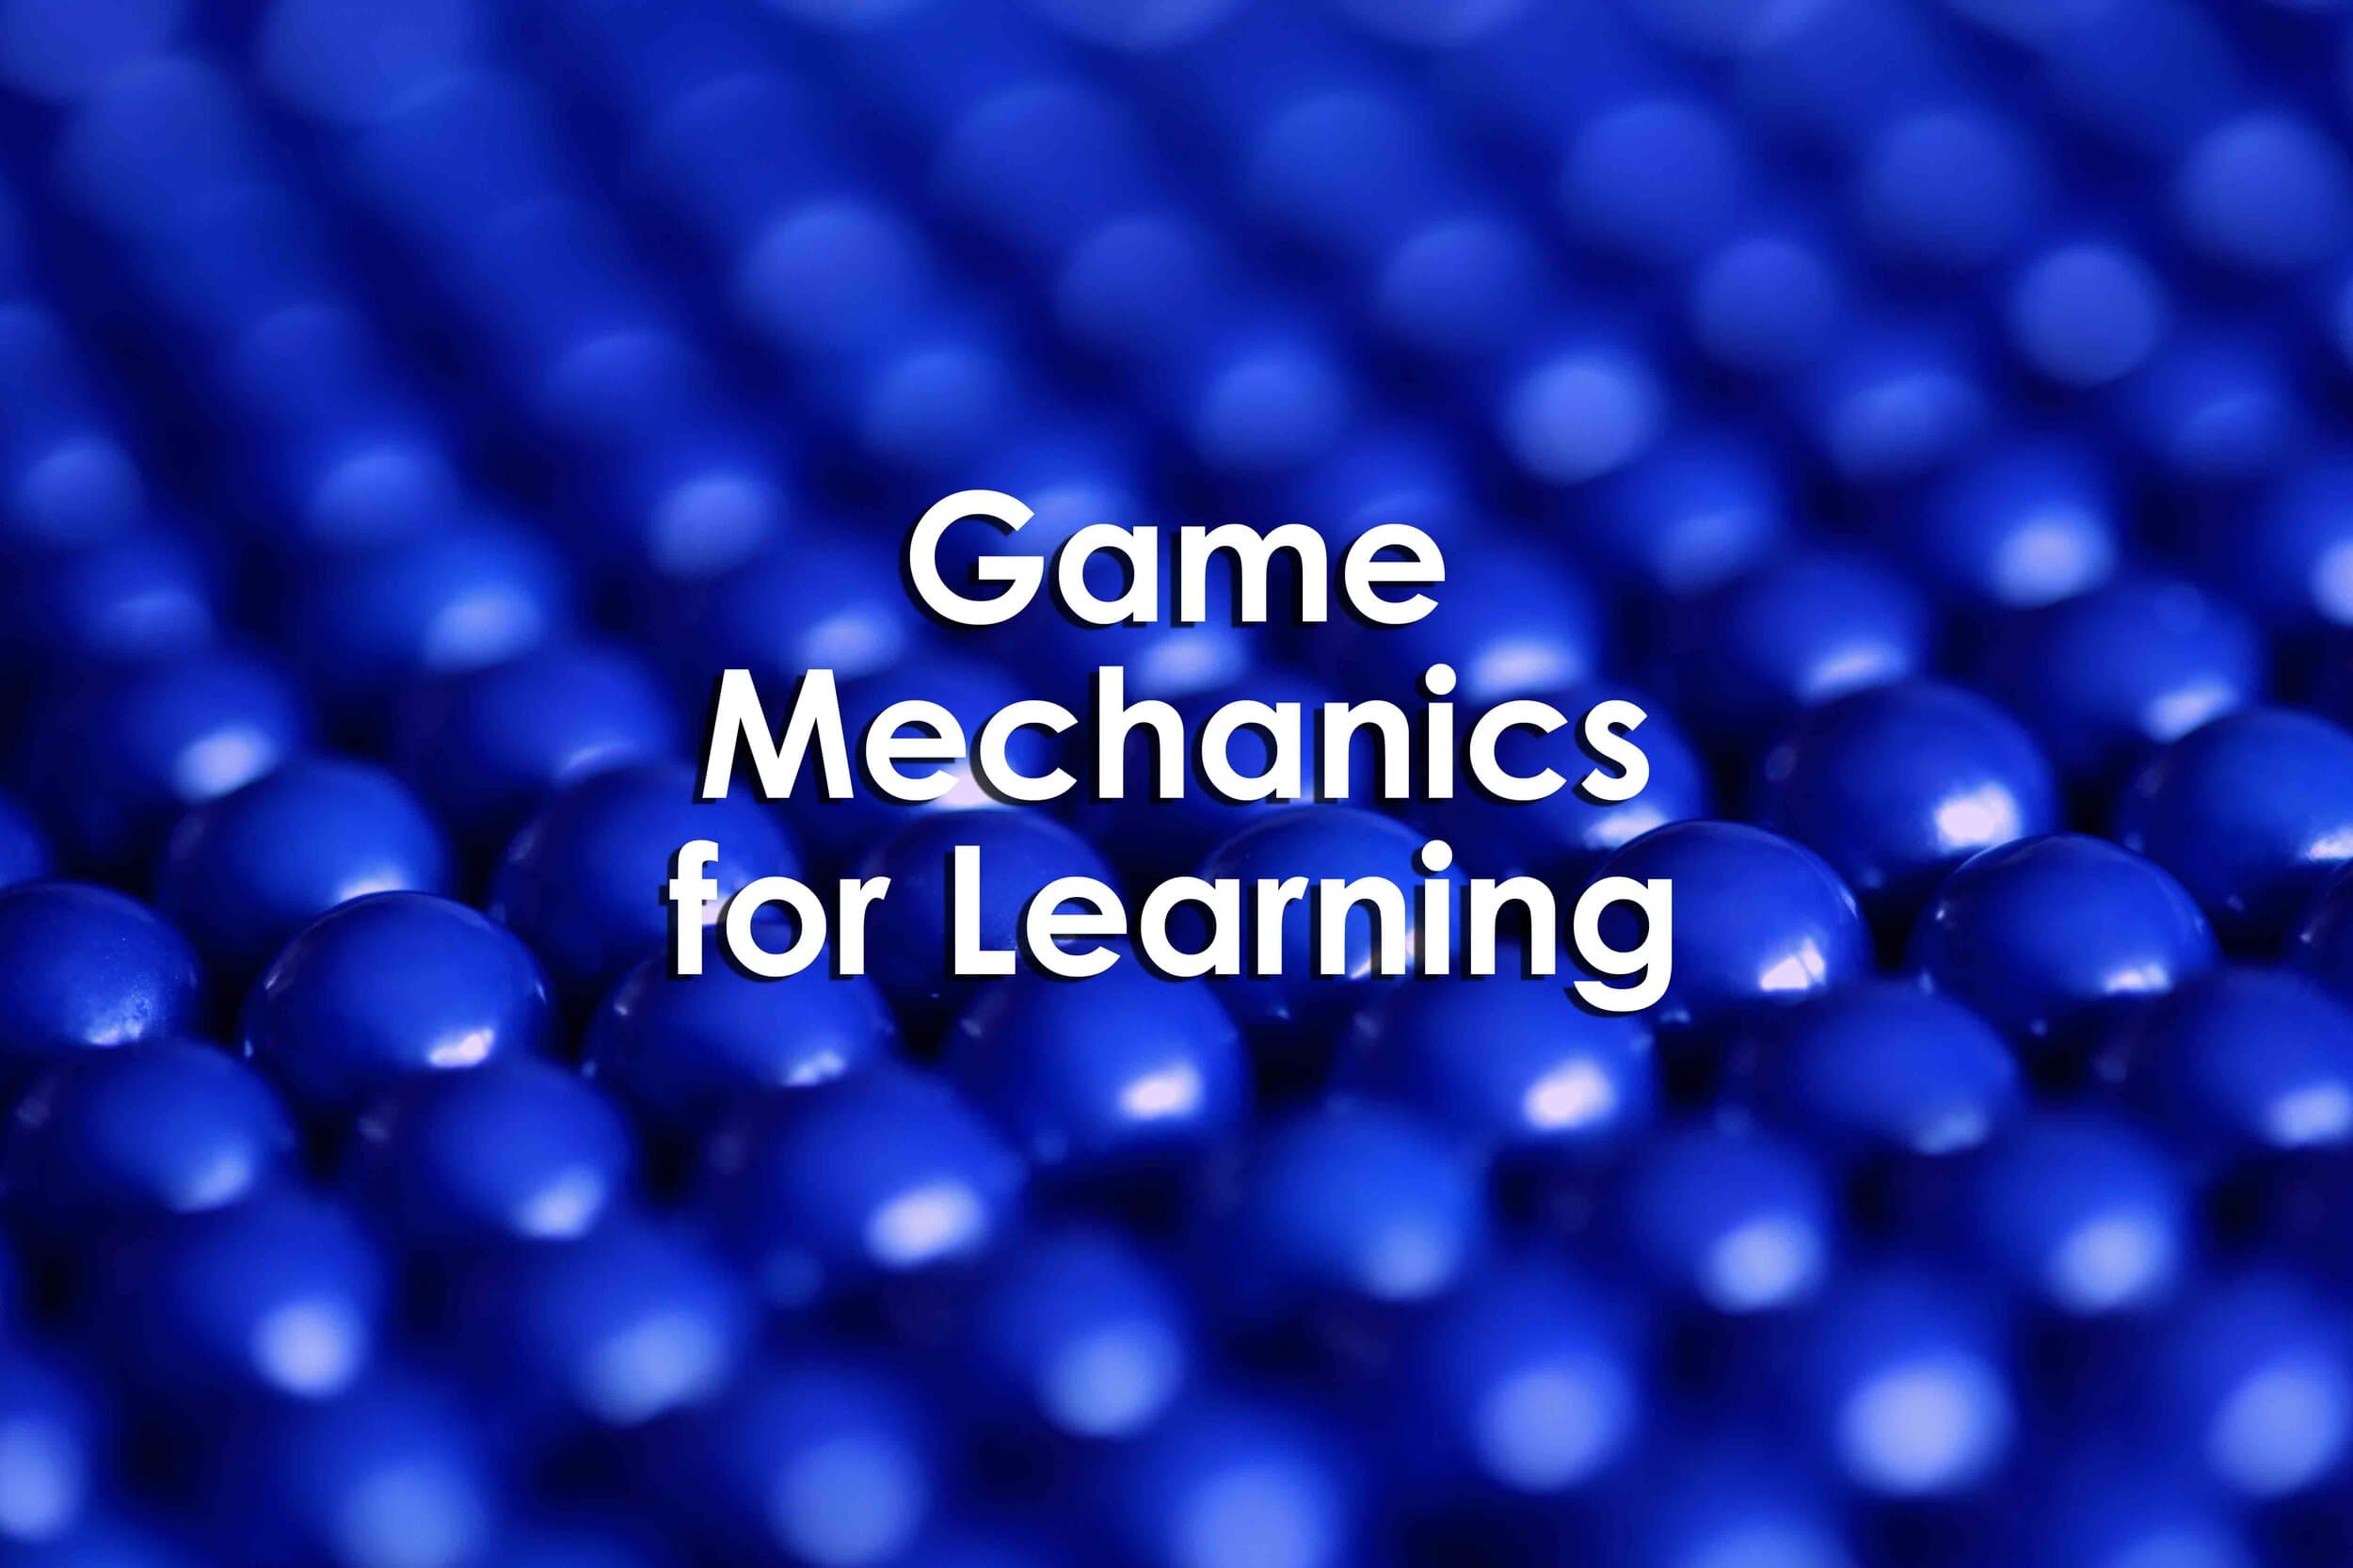 What is Game Mechanics Today?